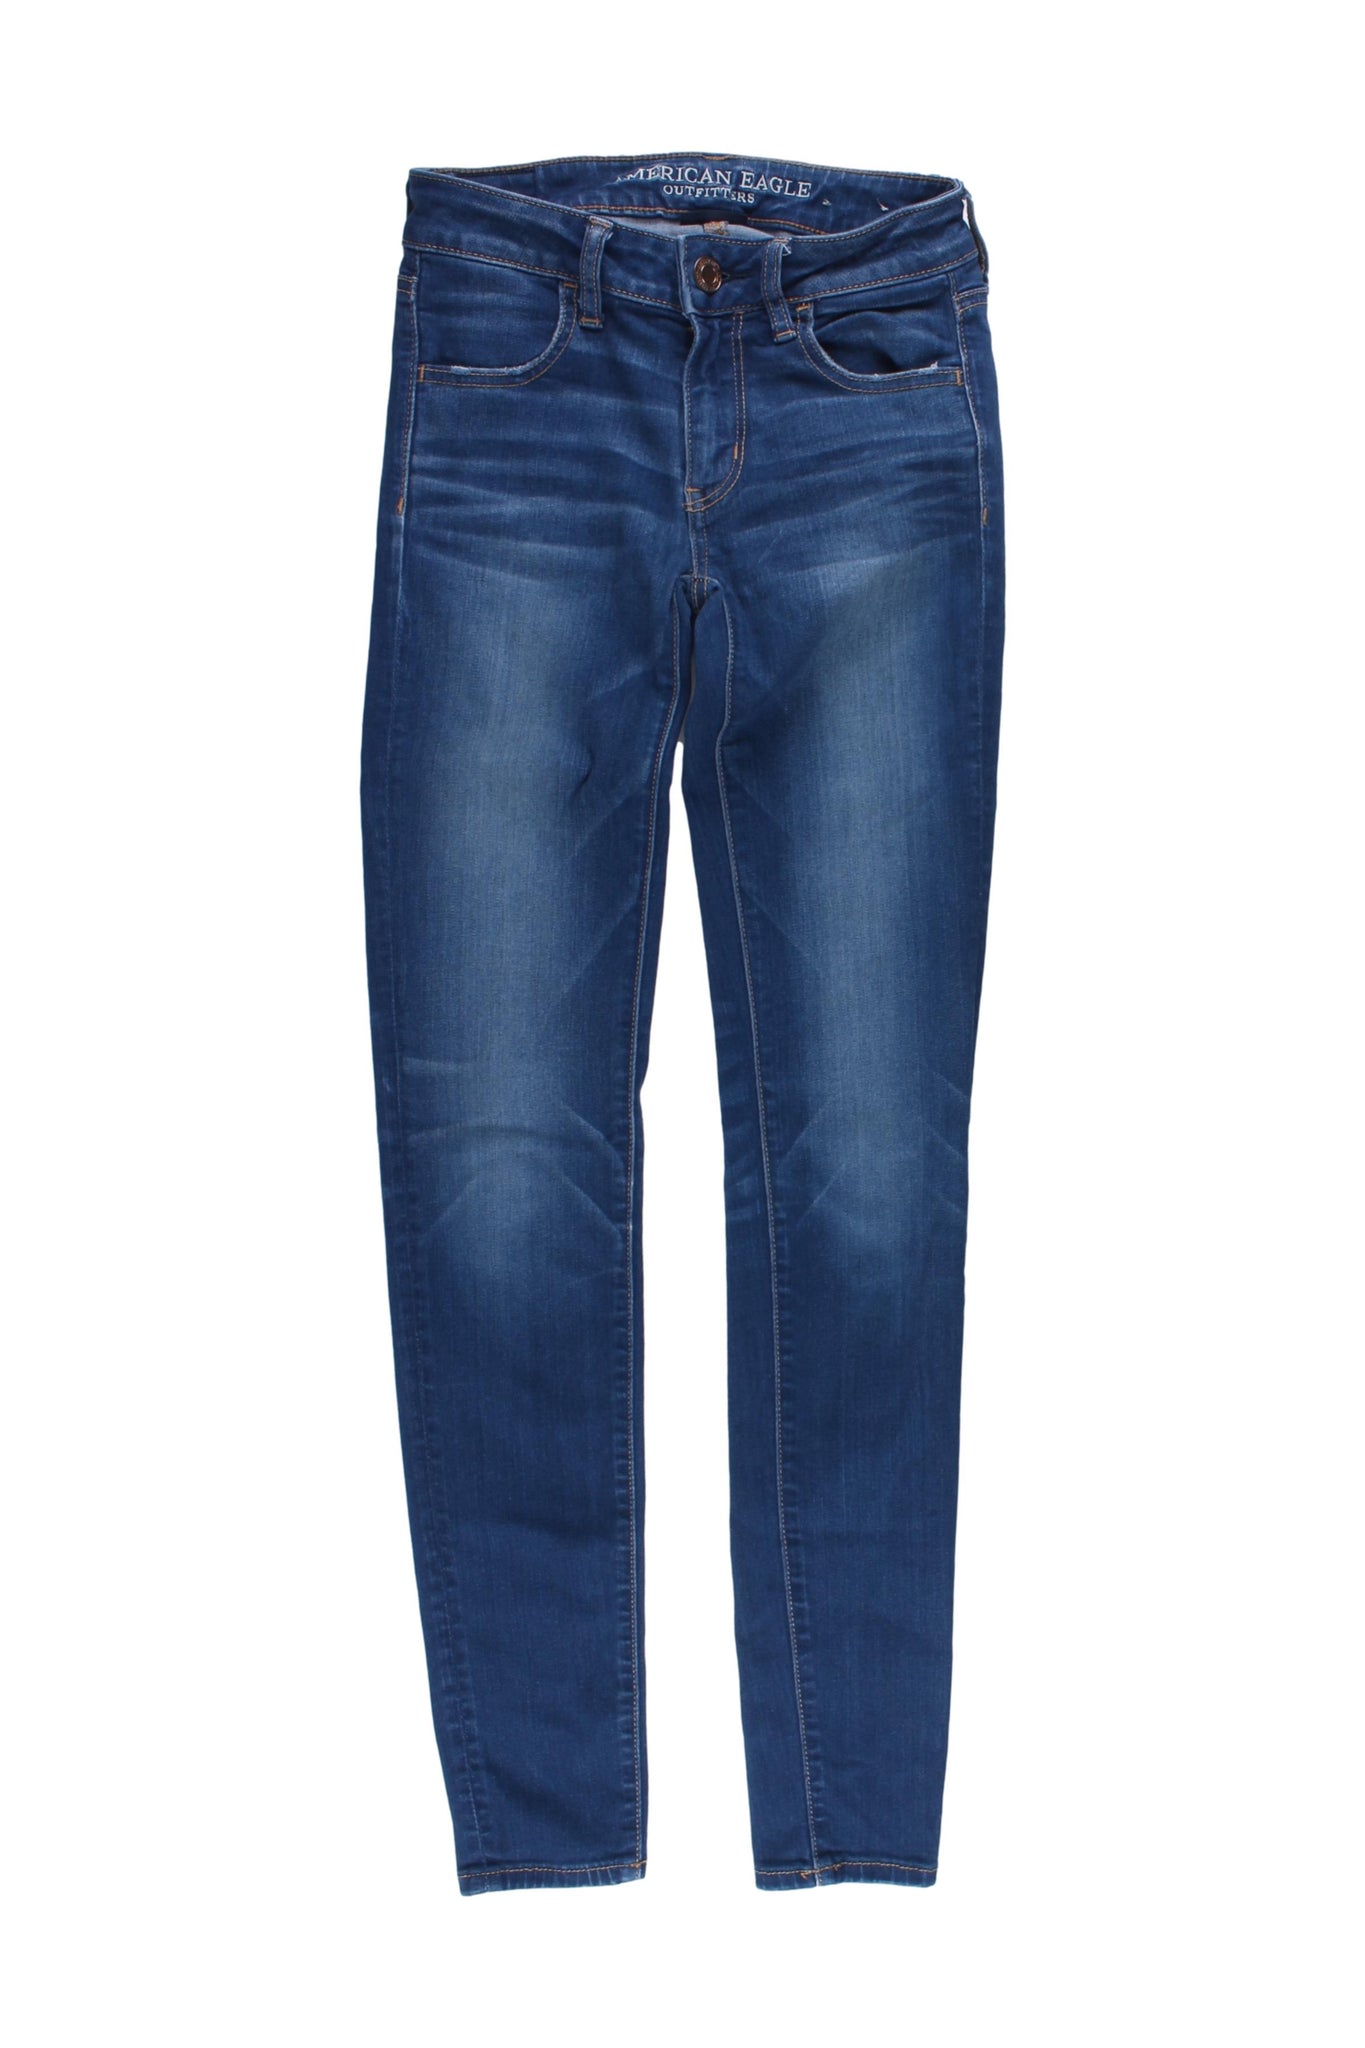 AMERICAN EAGLE OUTFITTERS - Skinny Jeans